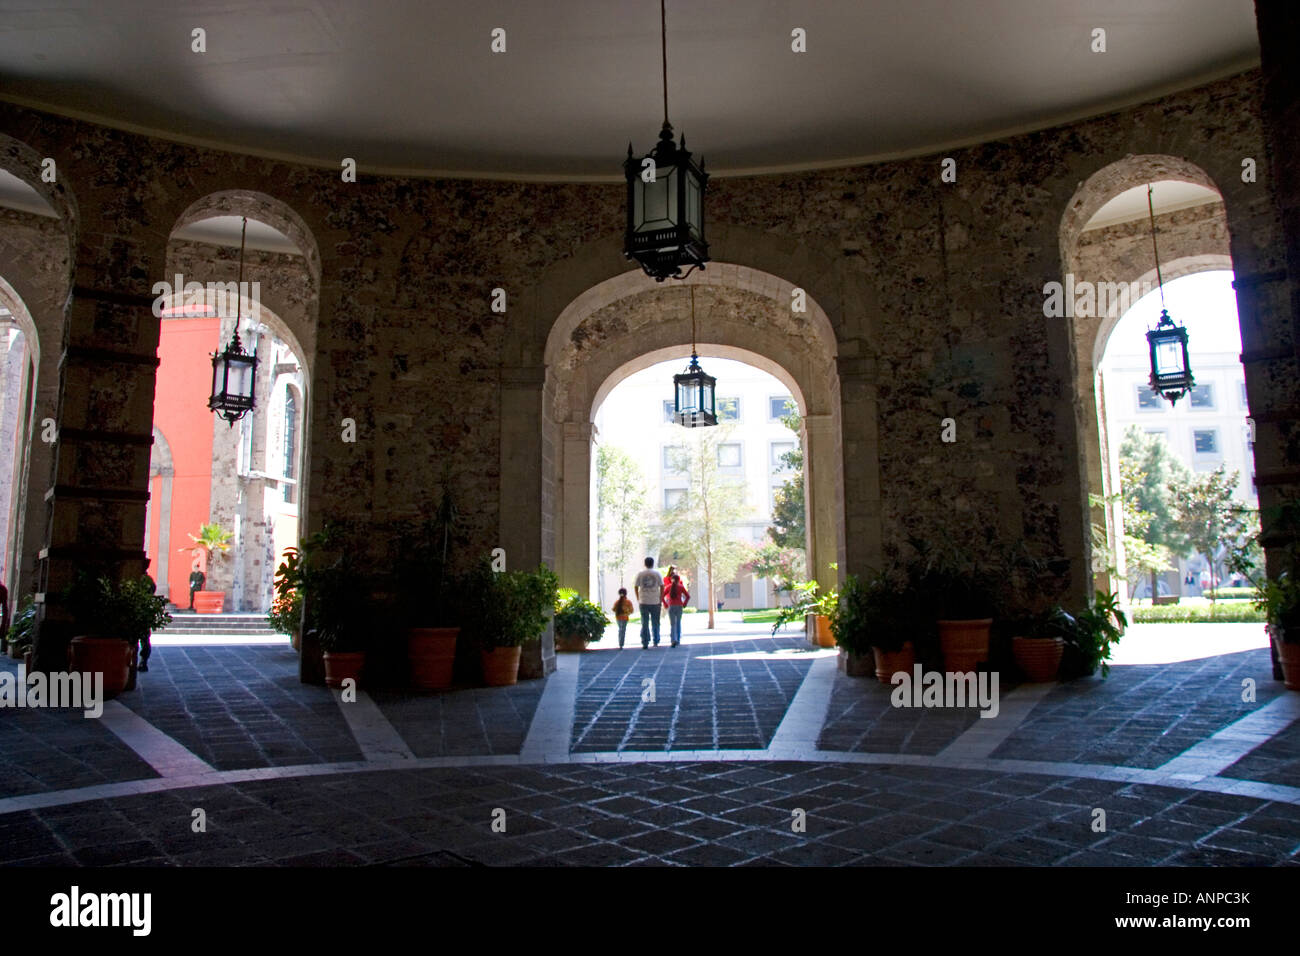 Archways frame the inner court yard at the National Palace in Mexico City Mexico Stock Photo